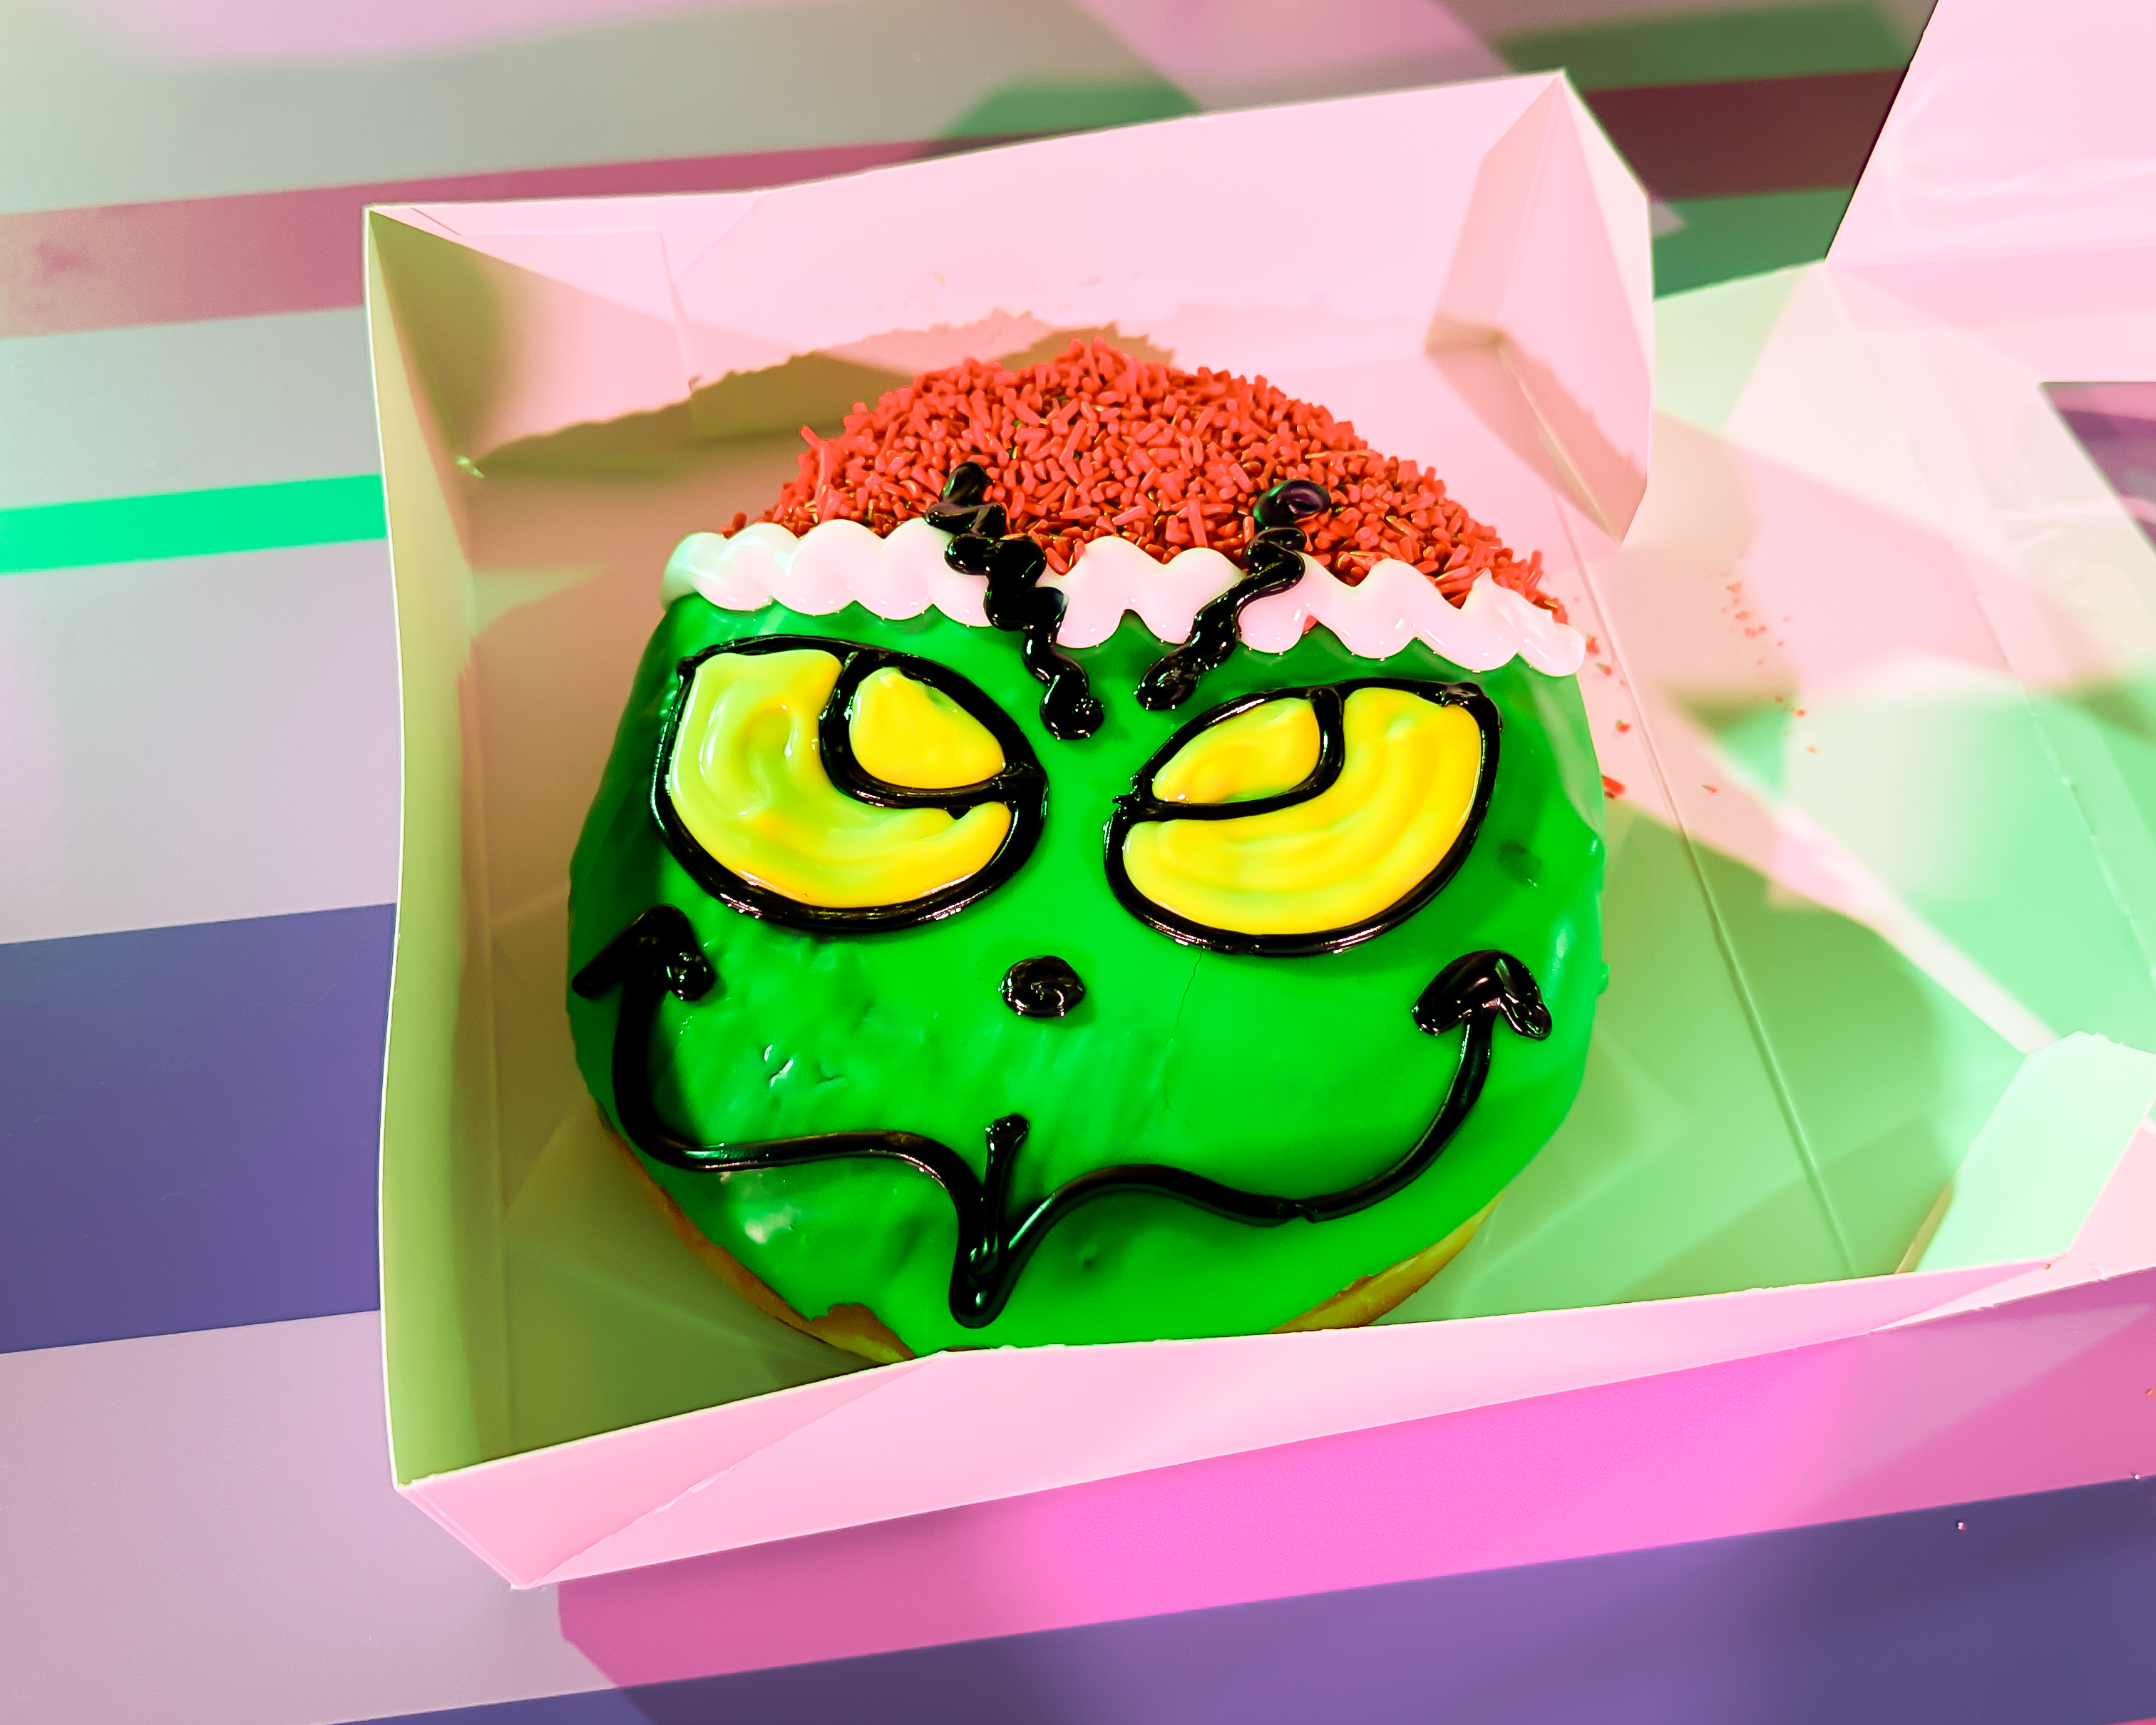 The Giant Grinch Donut at Grinchmas